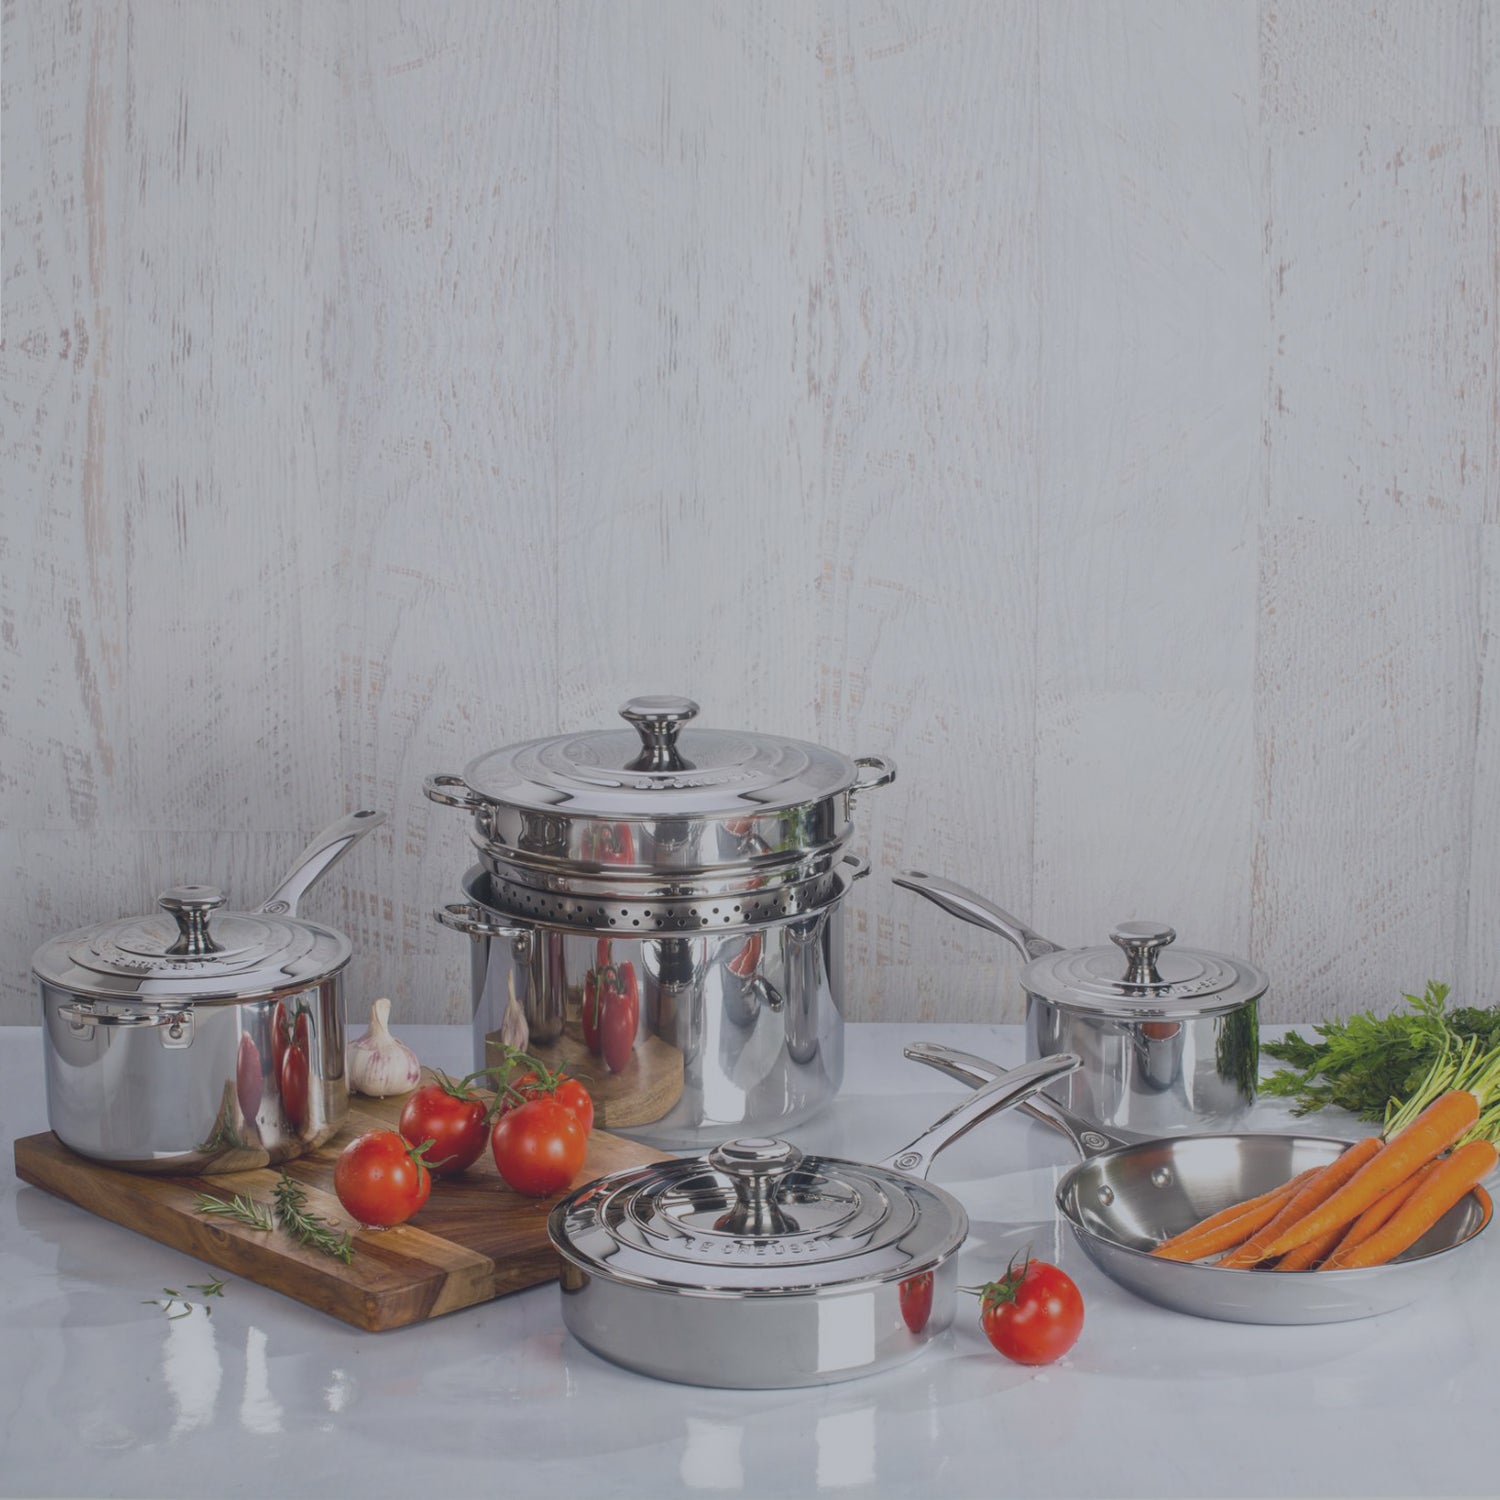 Le Creuset 10-Piece Stainless Steel Set